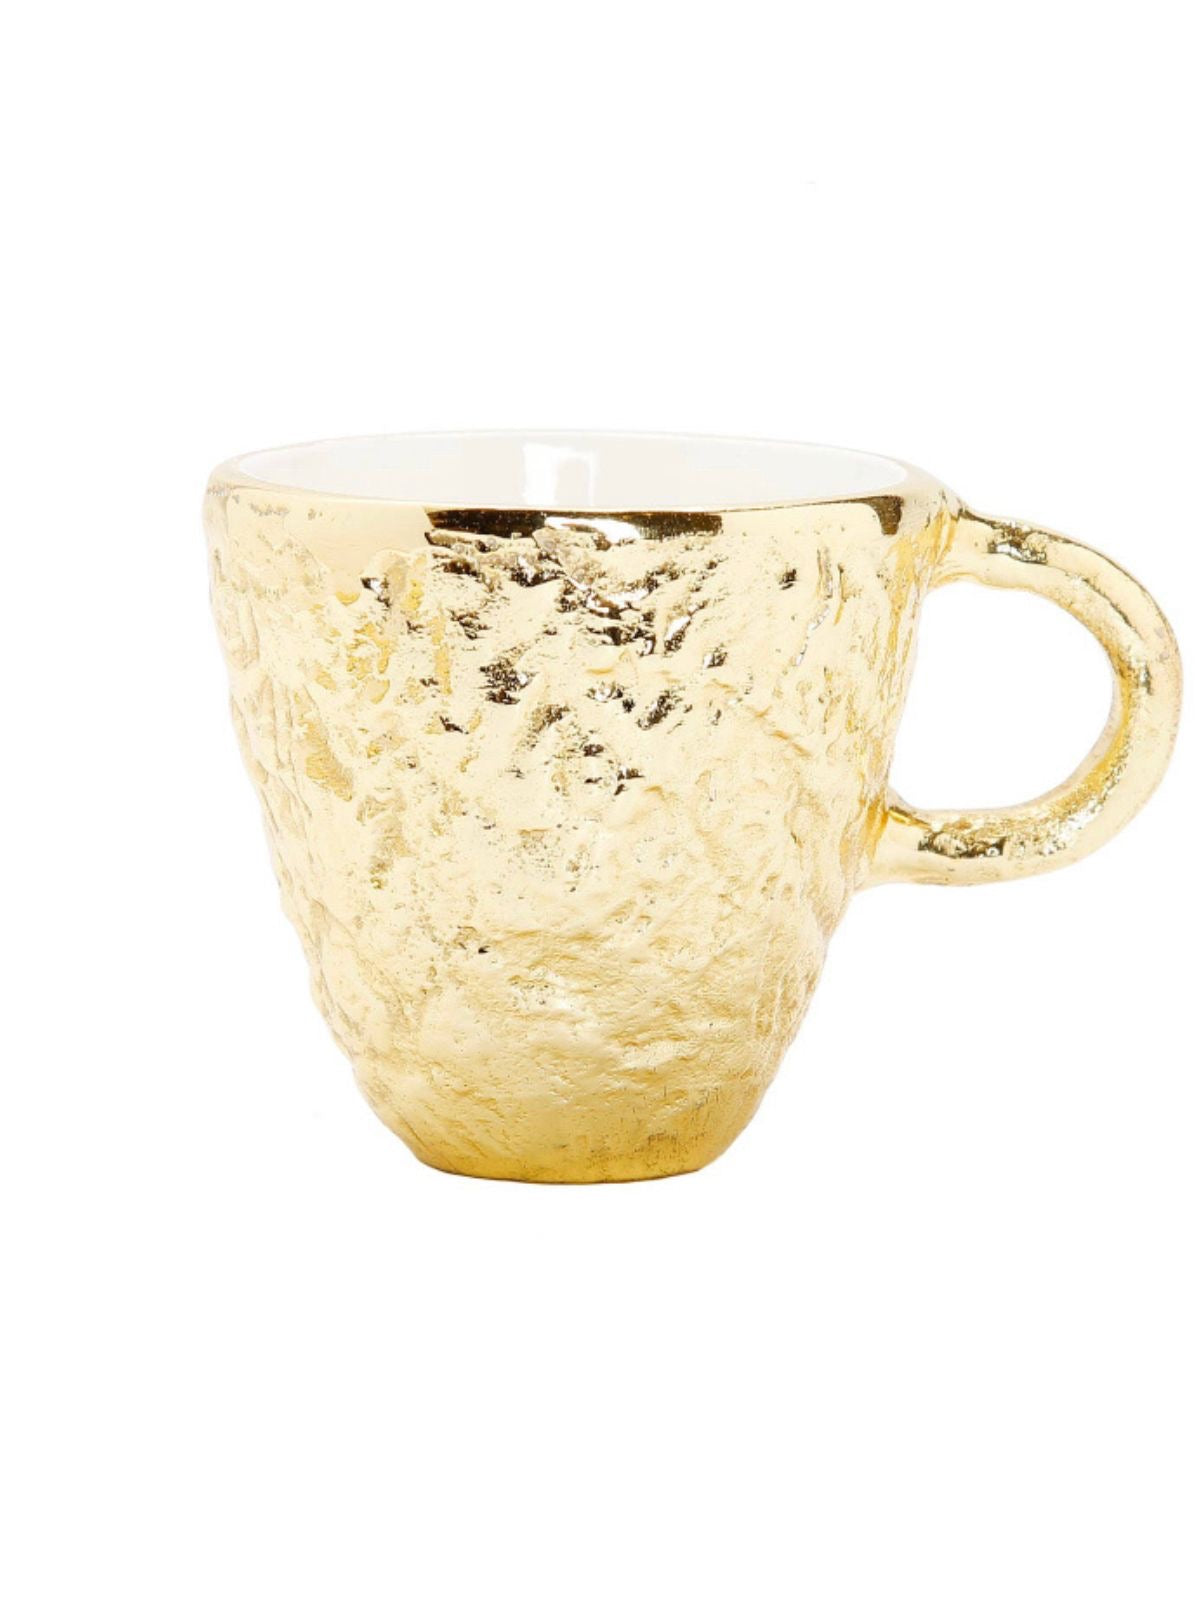 The Amazing Tazza D’ Oro Coffee Mug with Saucer Has a Beautiful Gold Textured Metal Outer and White Enamel Inside Available At KYA Home Decor